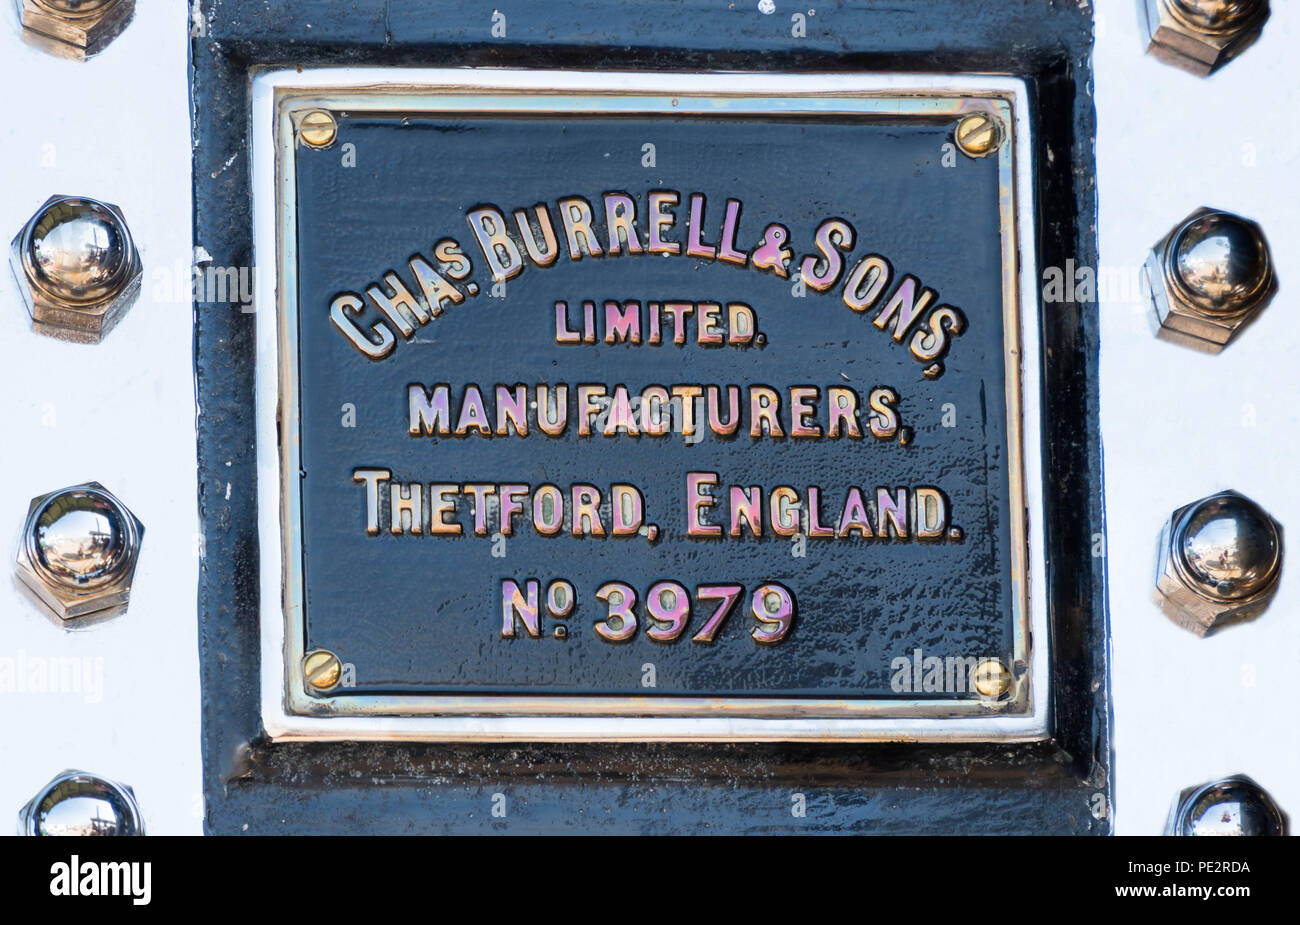 Name plaque of Burrell and Sons manufacturers of traction engines founded in Thetford UK 1770. Stock Photo